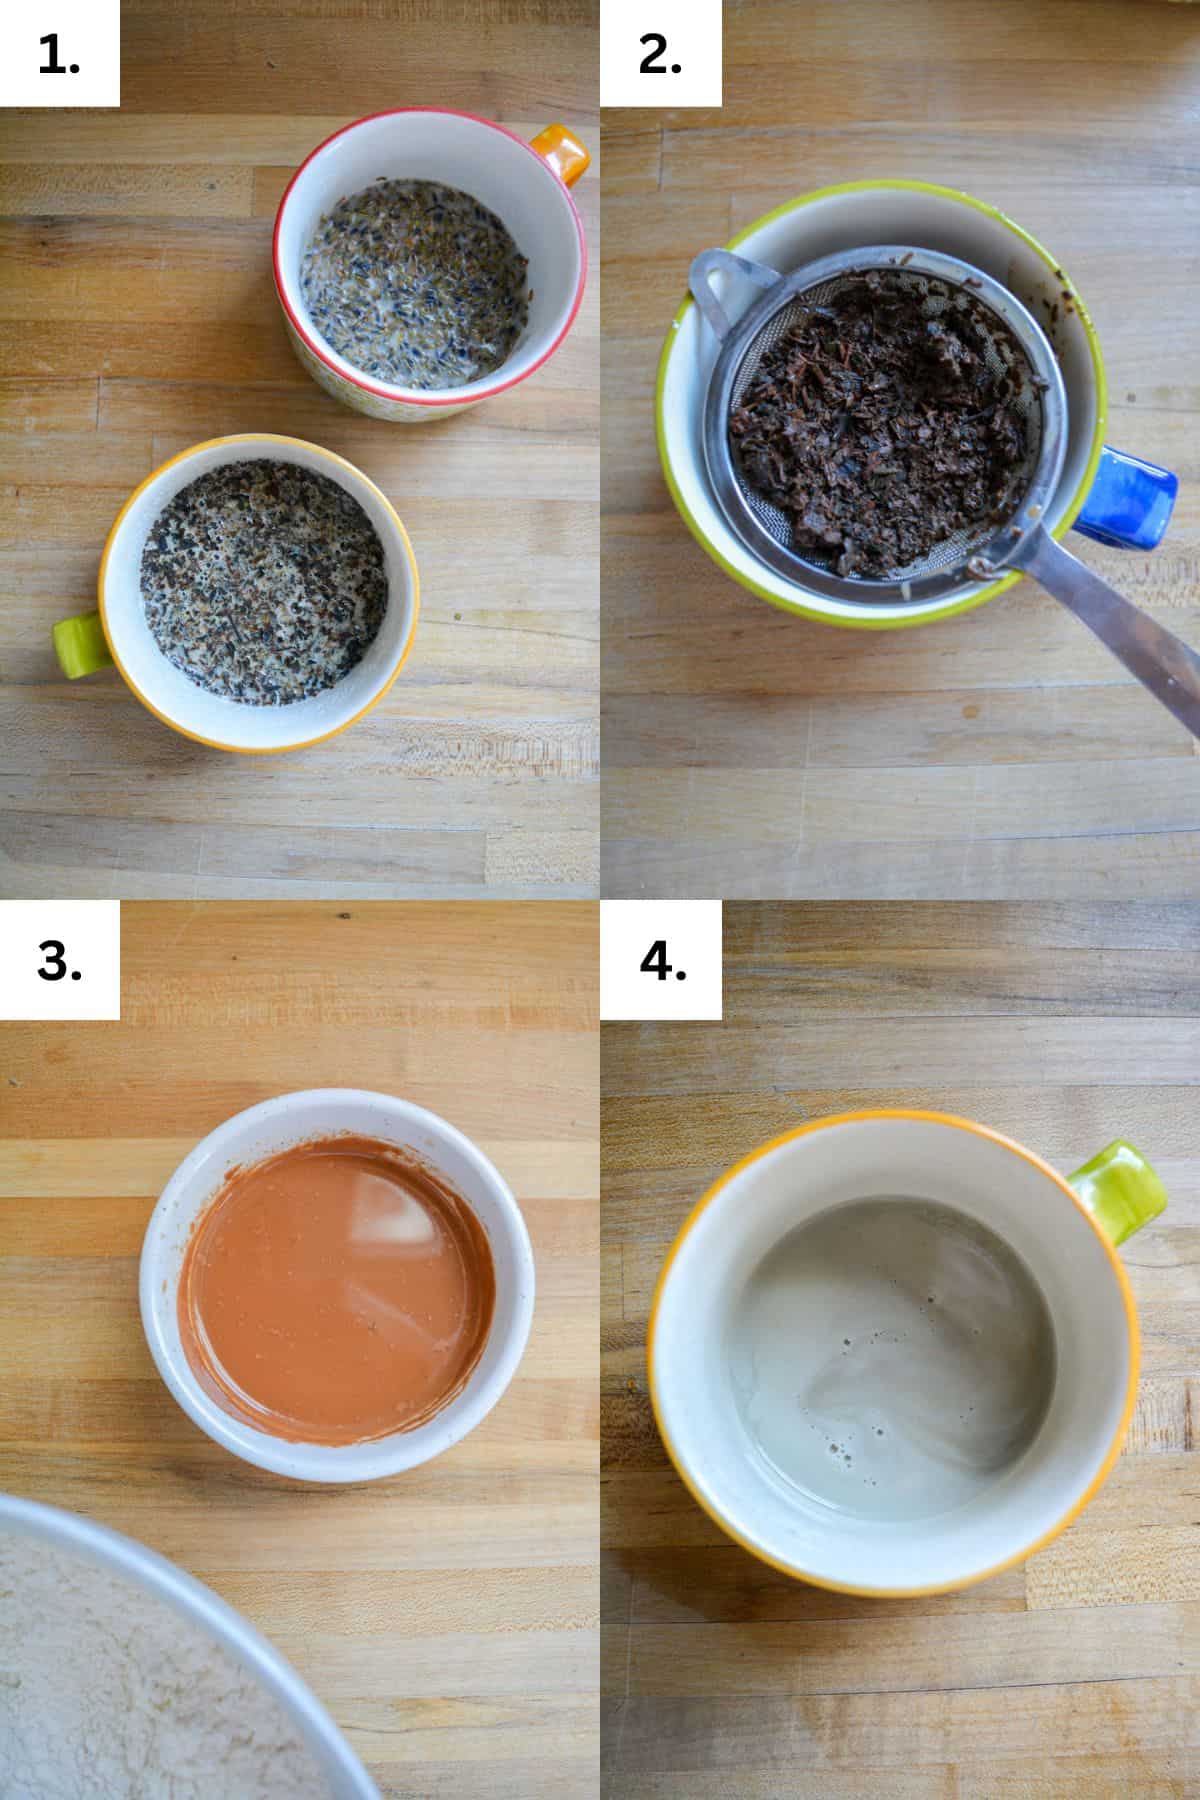 Step by step of brewing the earl grey tea and lavender flowers.